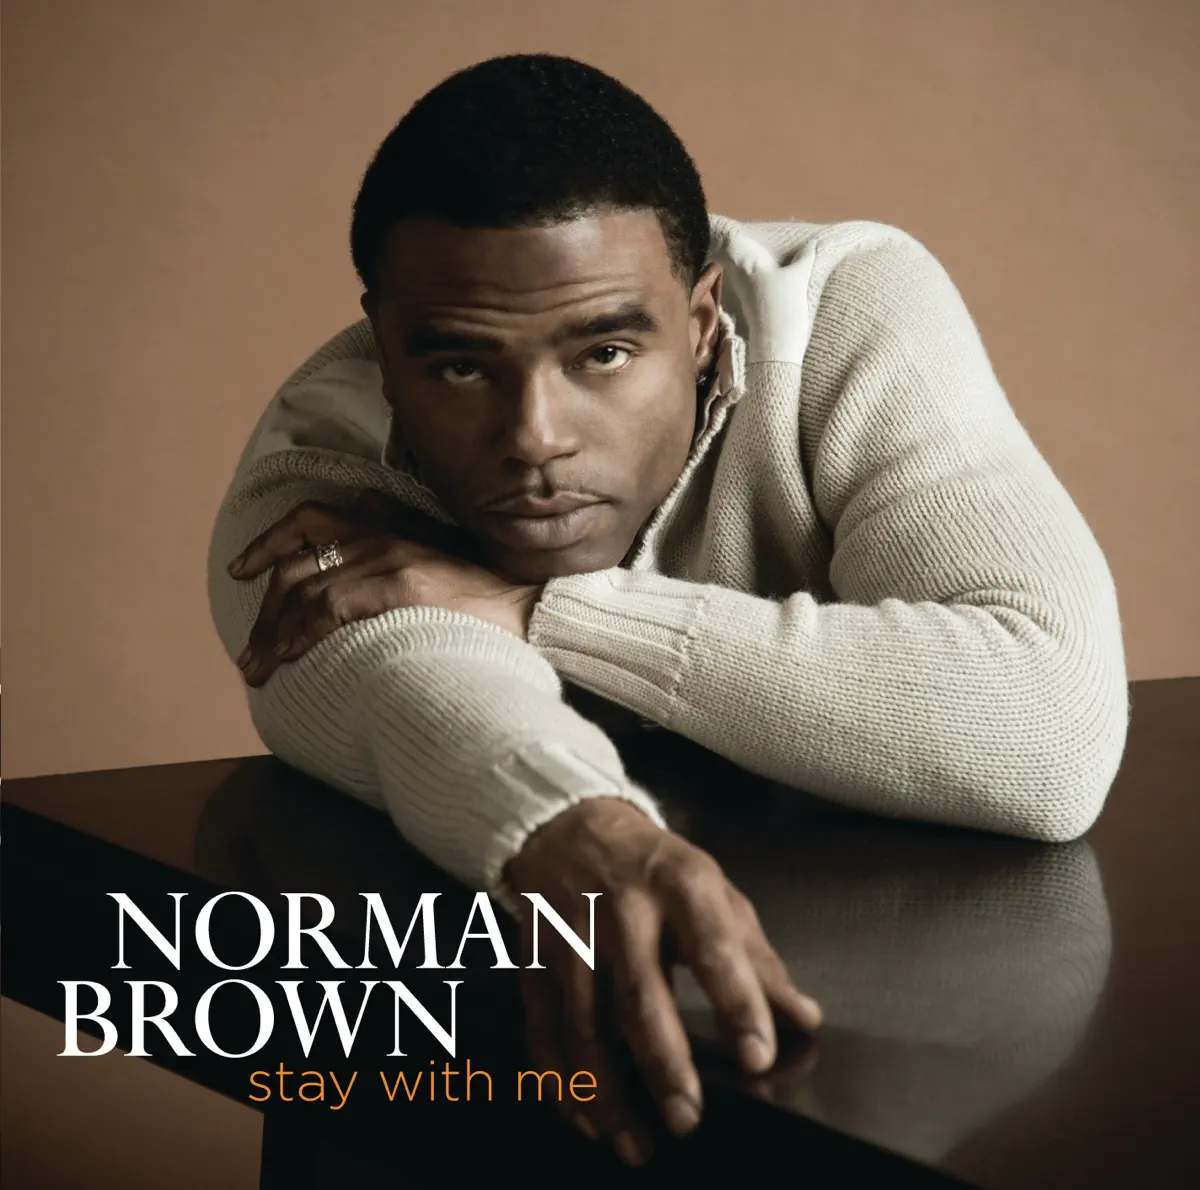 Norman Brown - Stay With Me (iTunes Exclusive) (2007) [iTunes Plus AAC M4A]-新房子